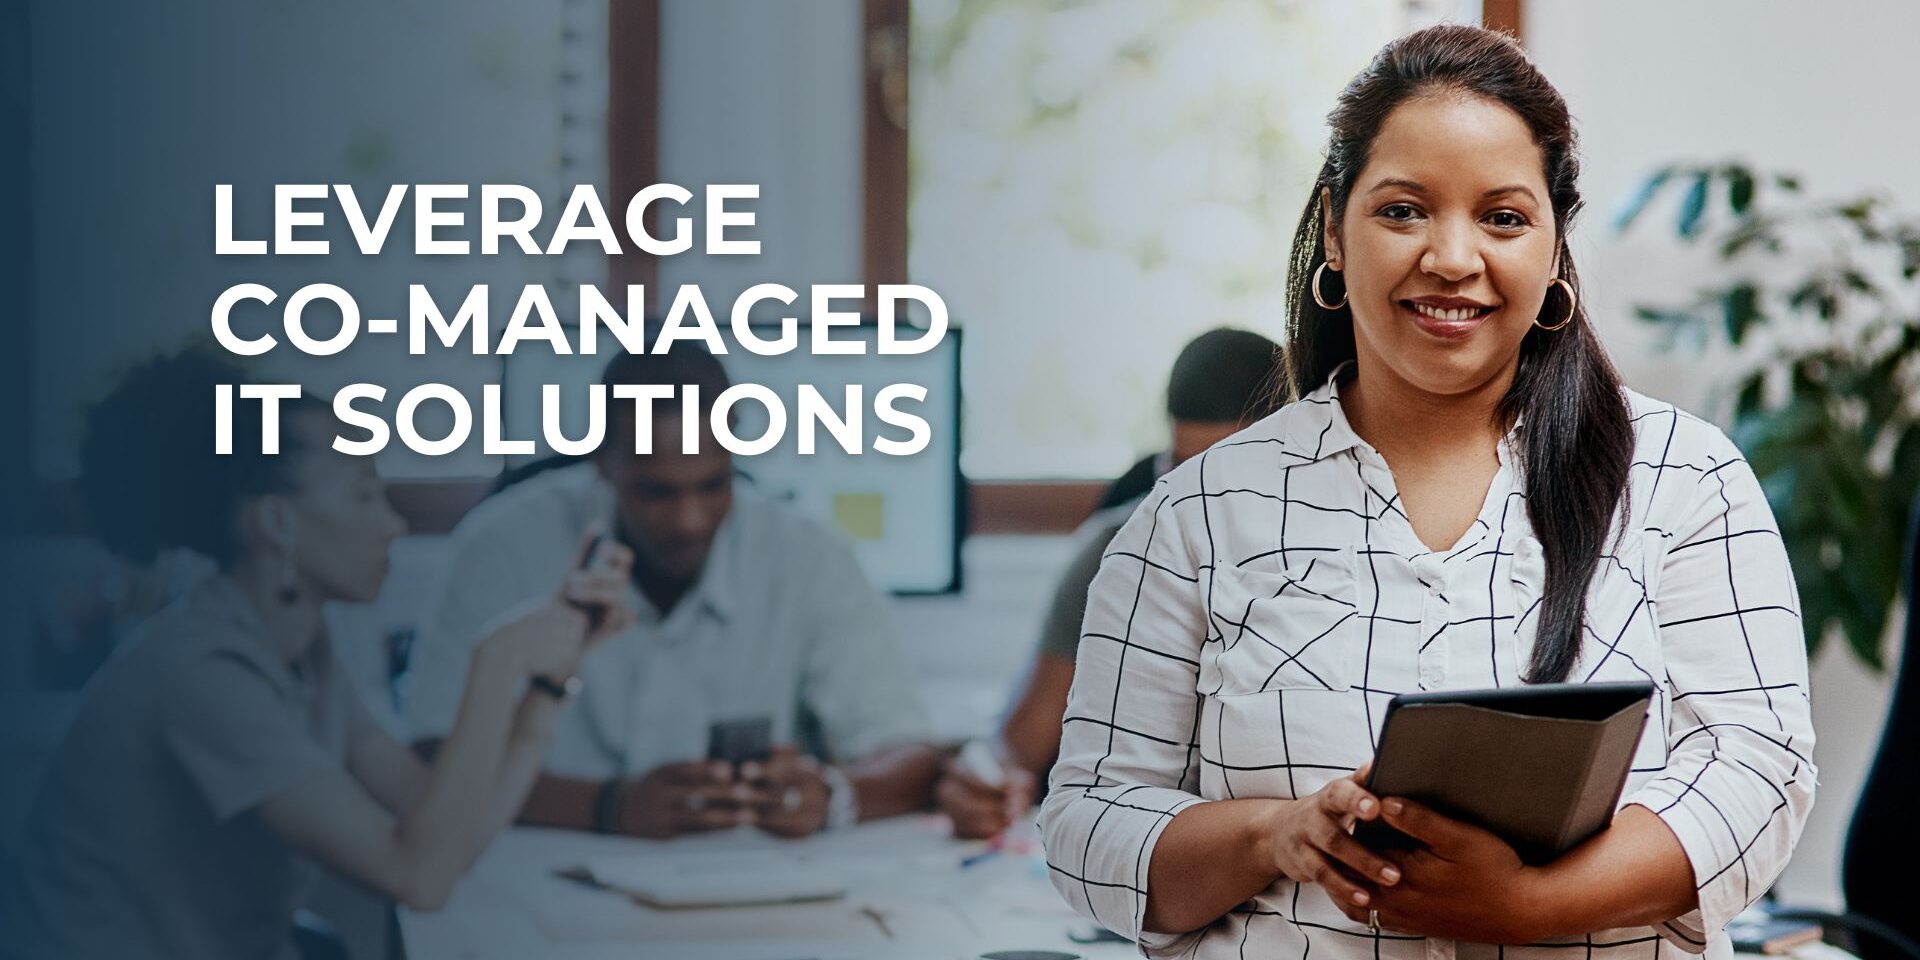 Leverage Co-Managed IT Solutions